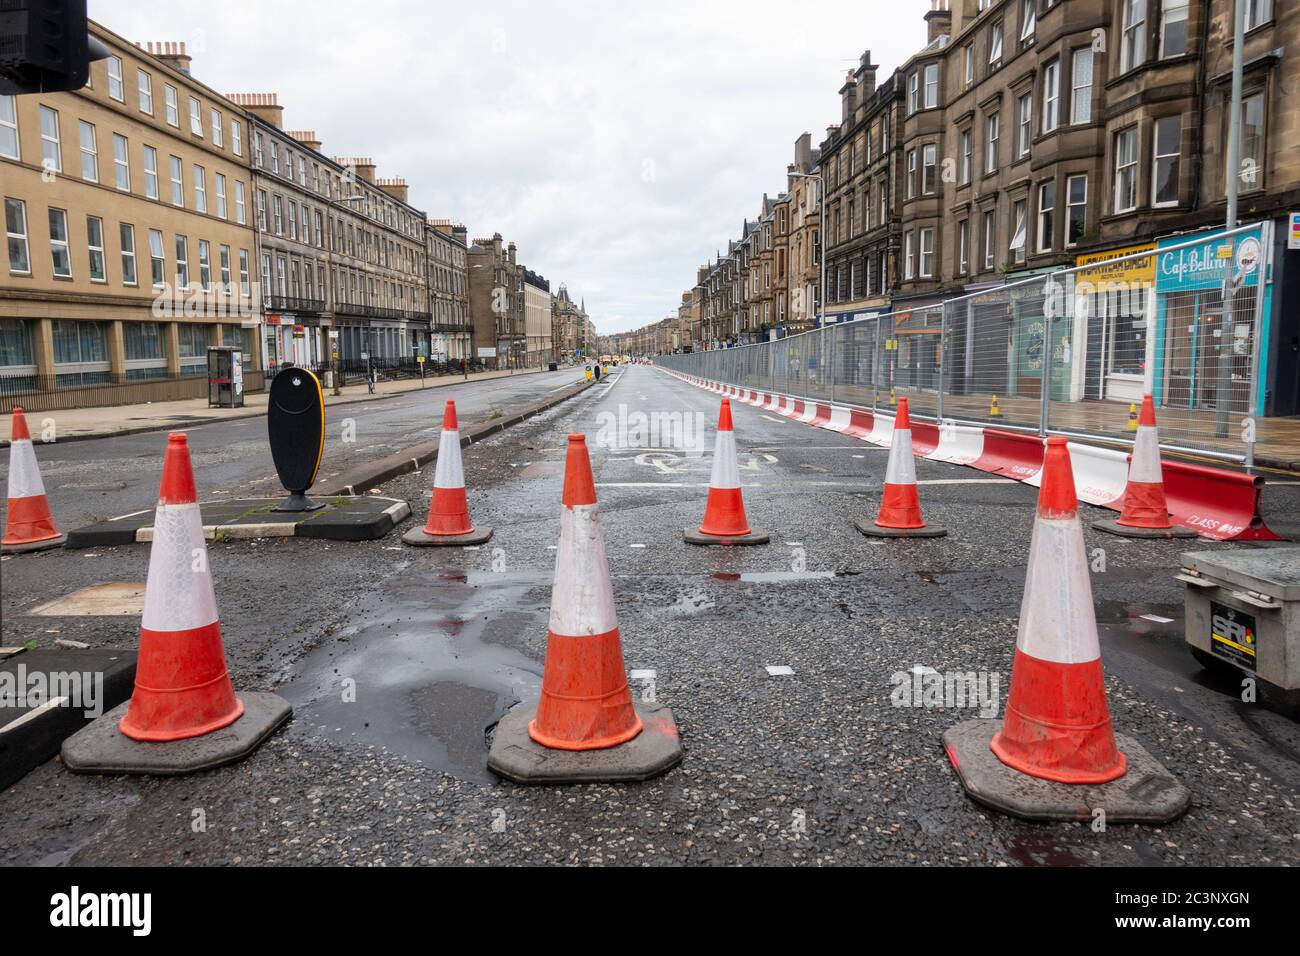 Edinburgh, Scotland, UK. 21 June, 2020. Traffic management work and lane closures on Leith Walk signals the start of construction work for the new Edinburgh tram line extension to Newhaven. Disruption to traffic and businesses on Leith Walk is expected to last for over a year. Iain Masterton/Alamy Live News Stock Photo